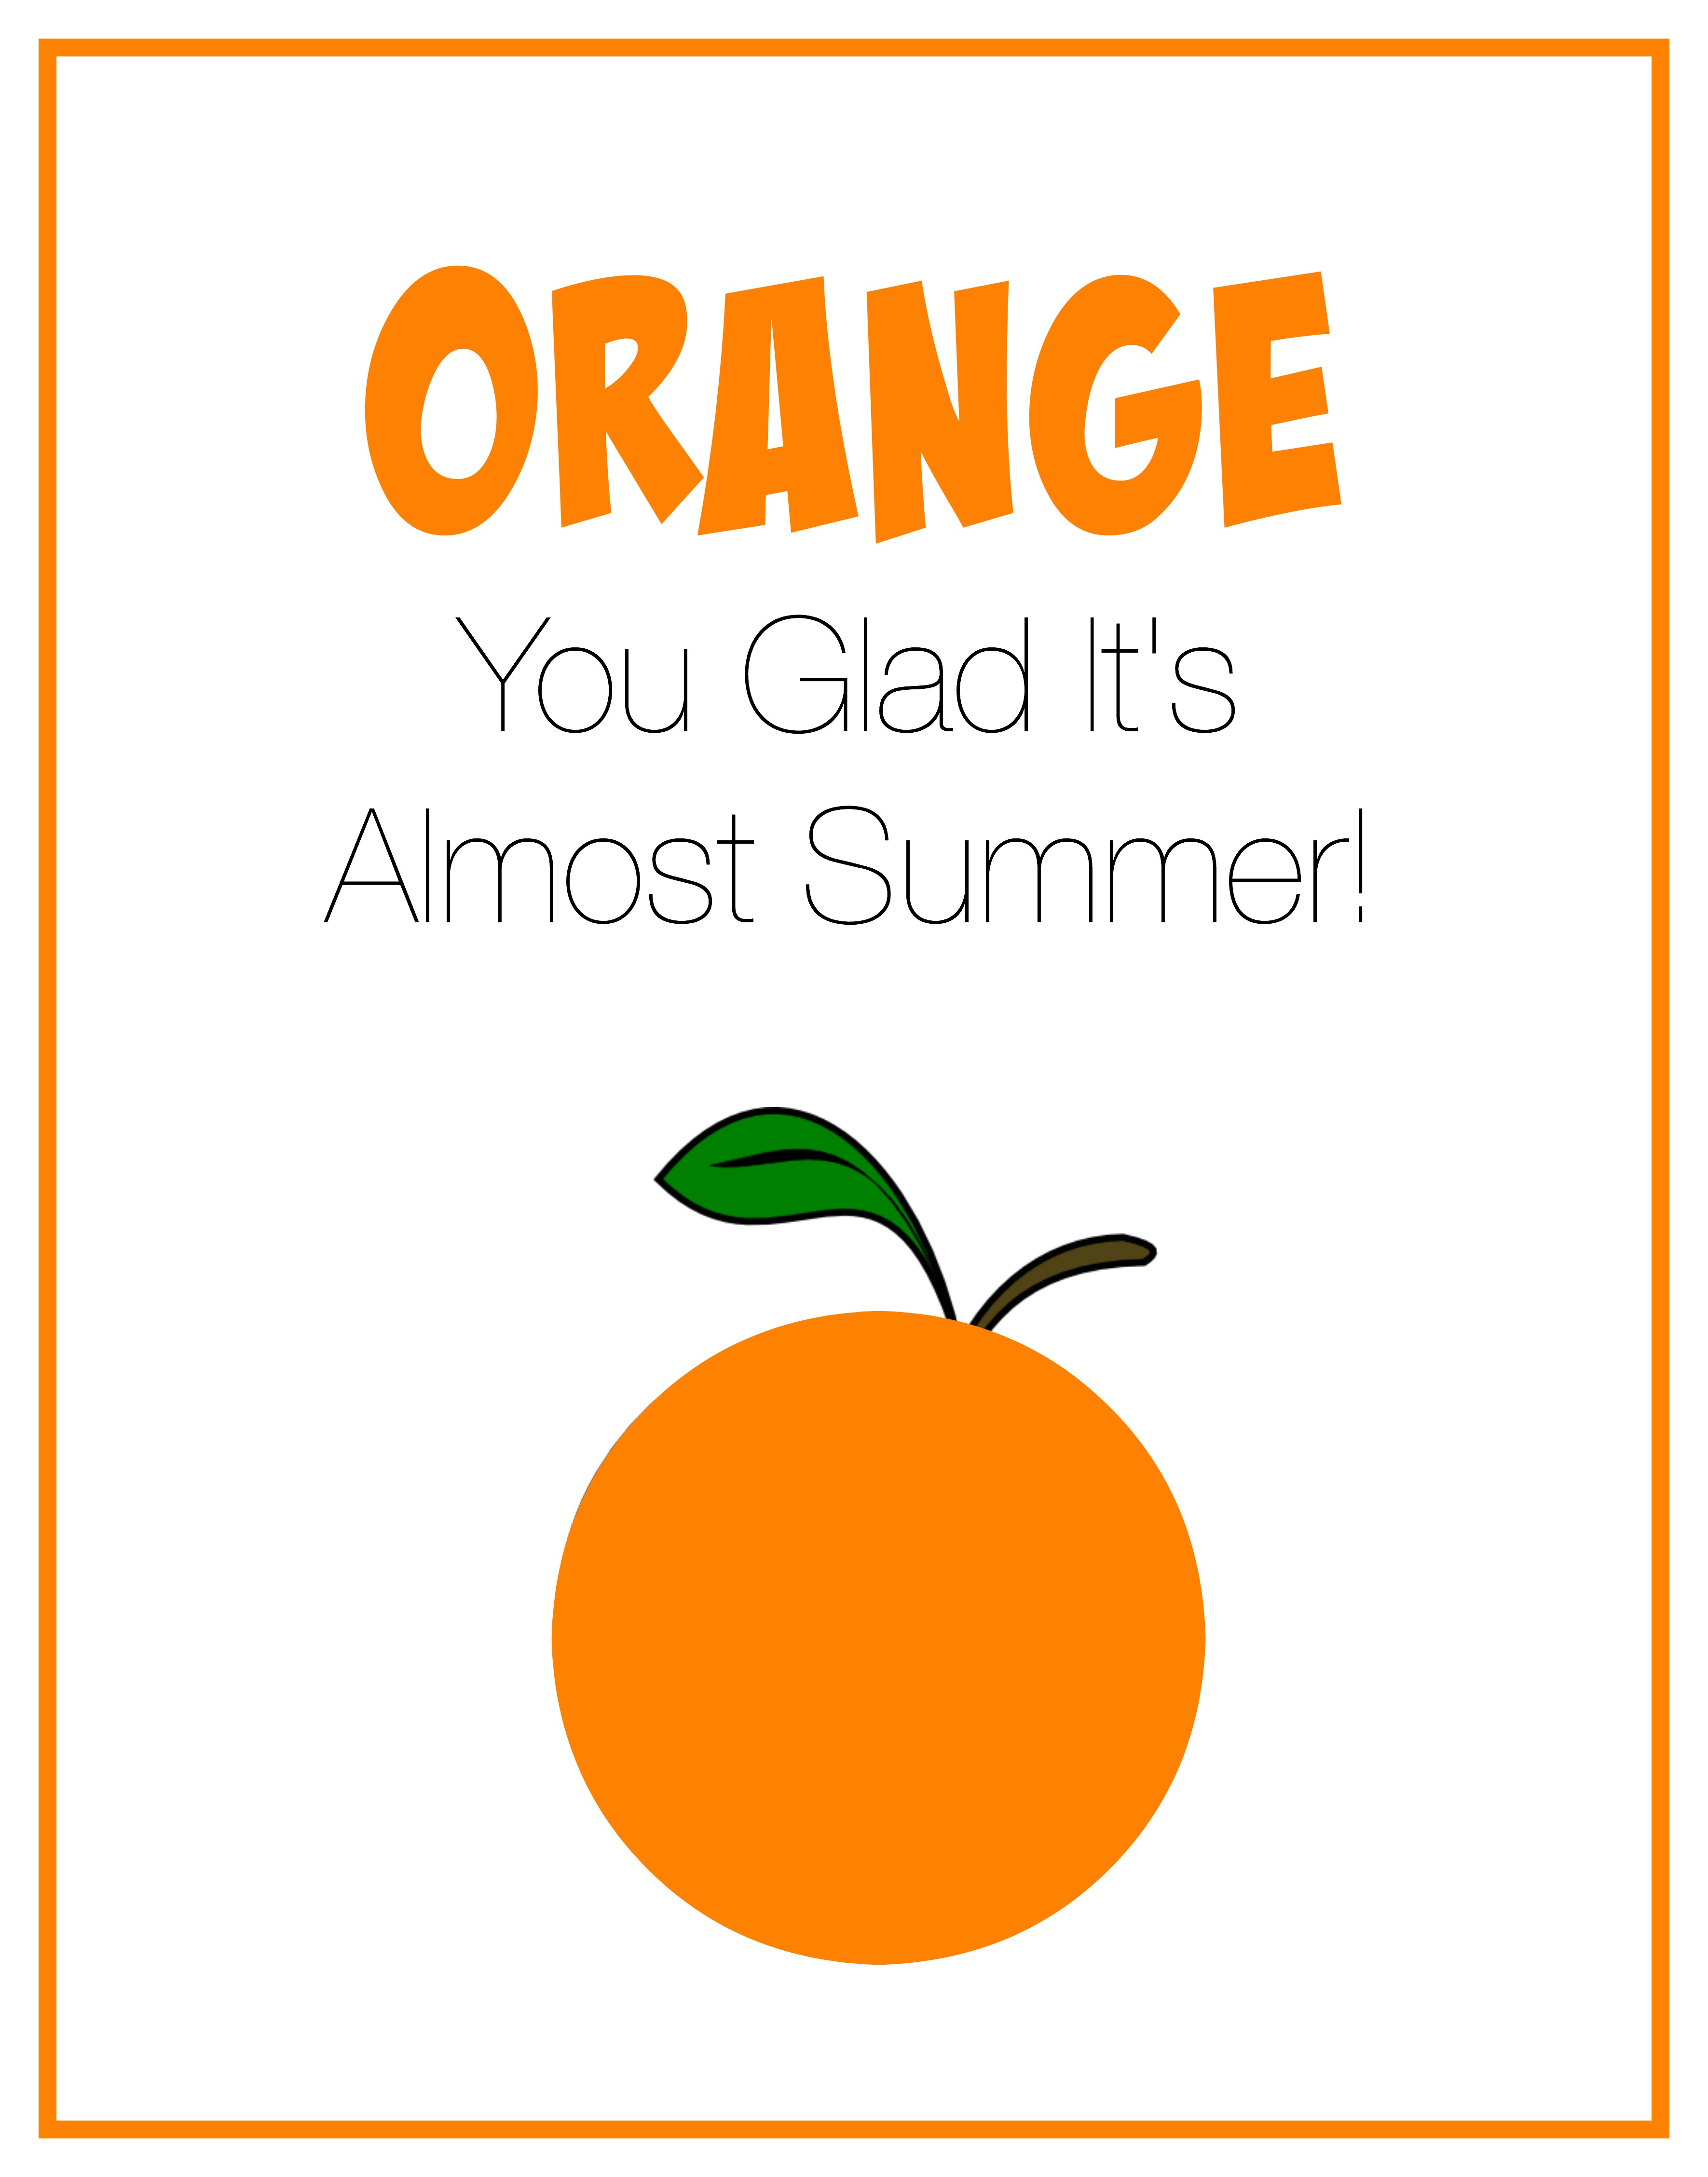 EOS Lip Balm Orange You Glad It's Summer Card with Free Printable